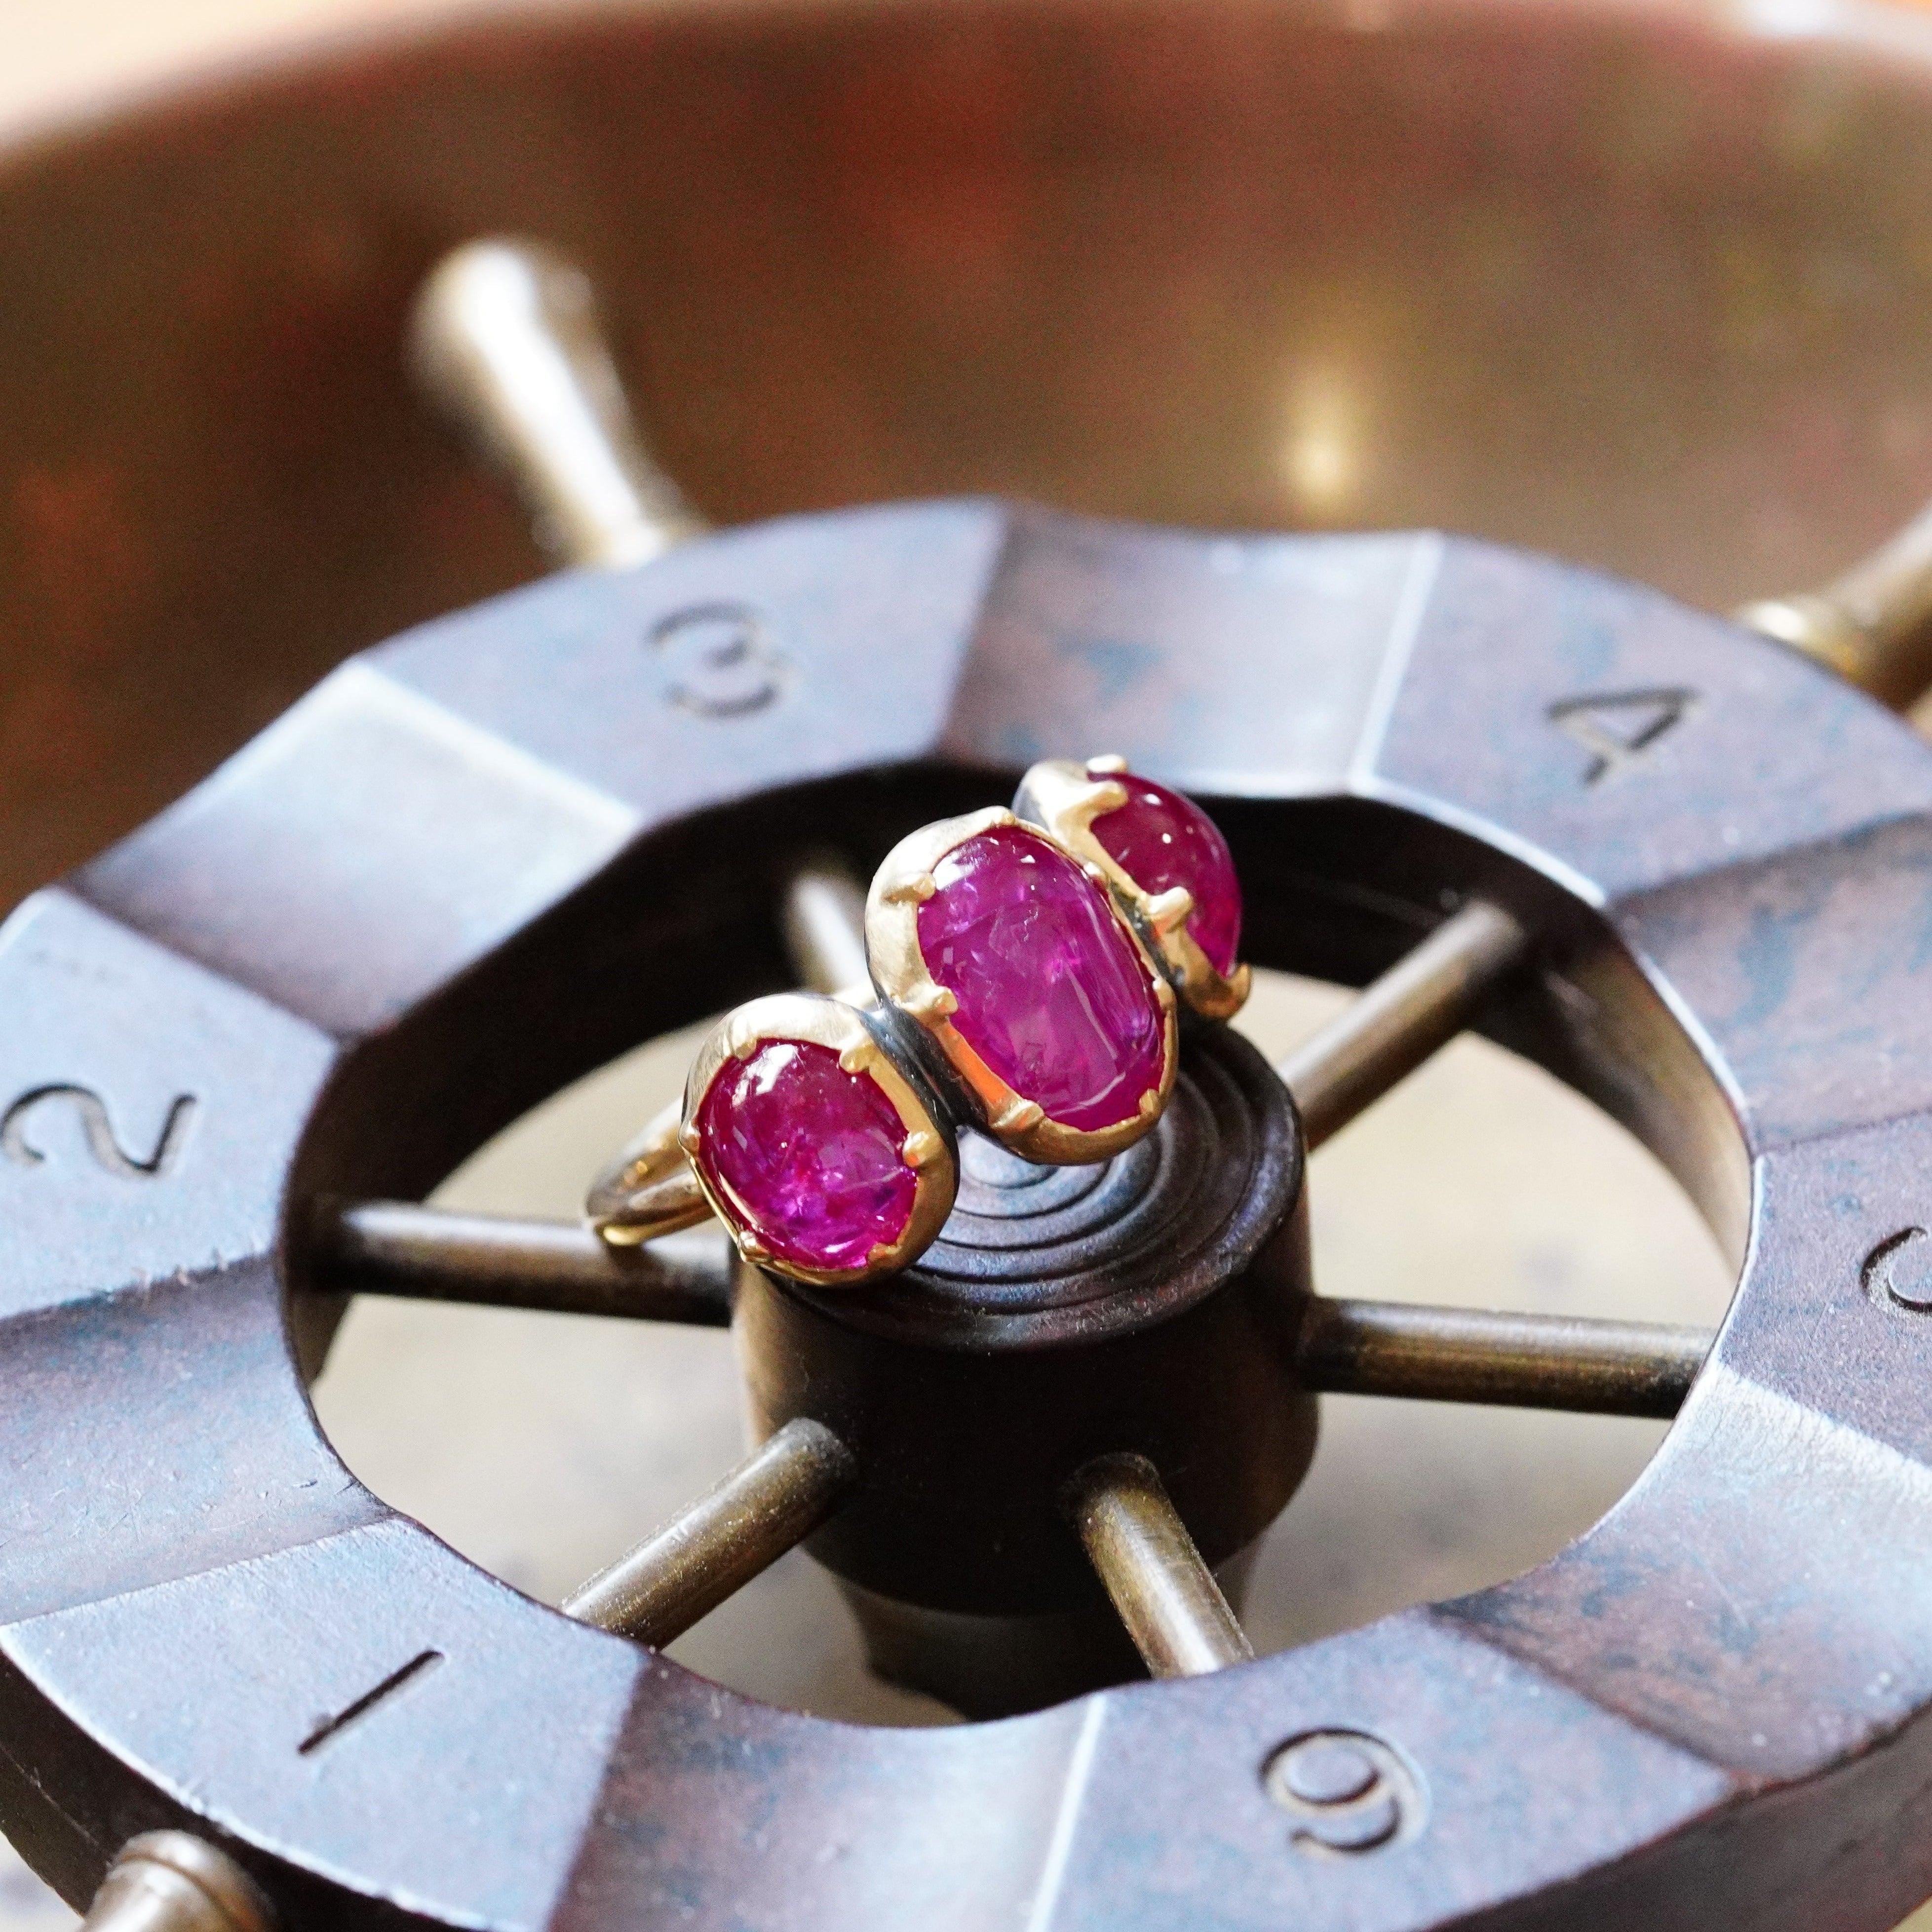 Three-Stone Burmese Ruby Ring - Victorian-Inspired Ruby Jewelry by Anup Jogani